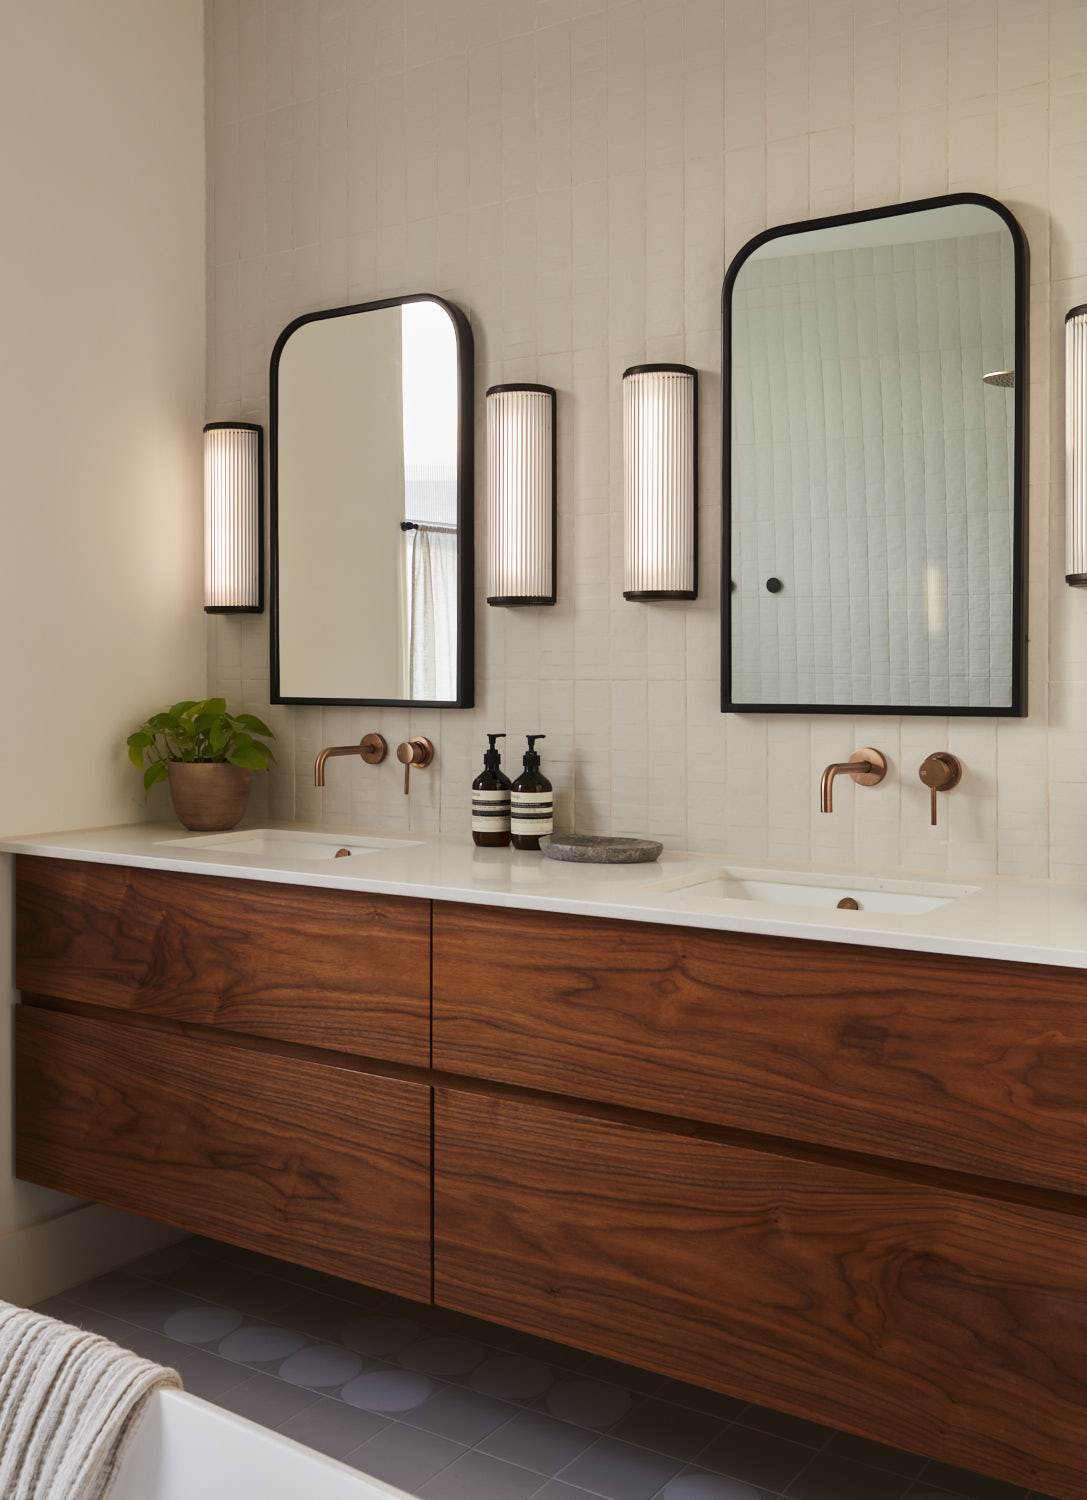 stylish wooden bathroom cabinet with a double sink and mirrors